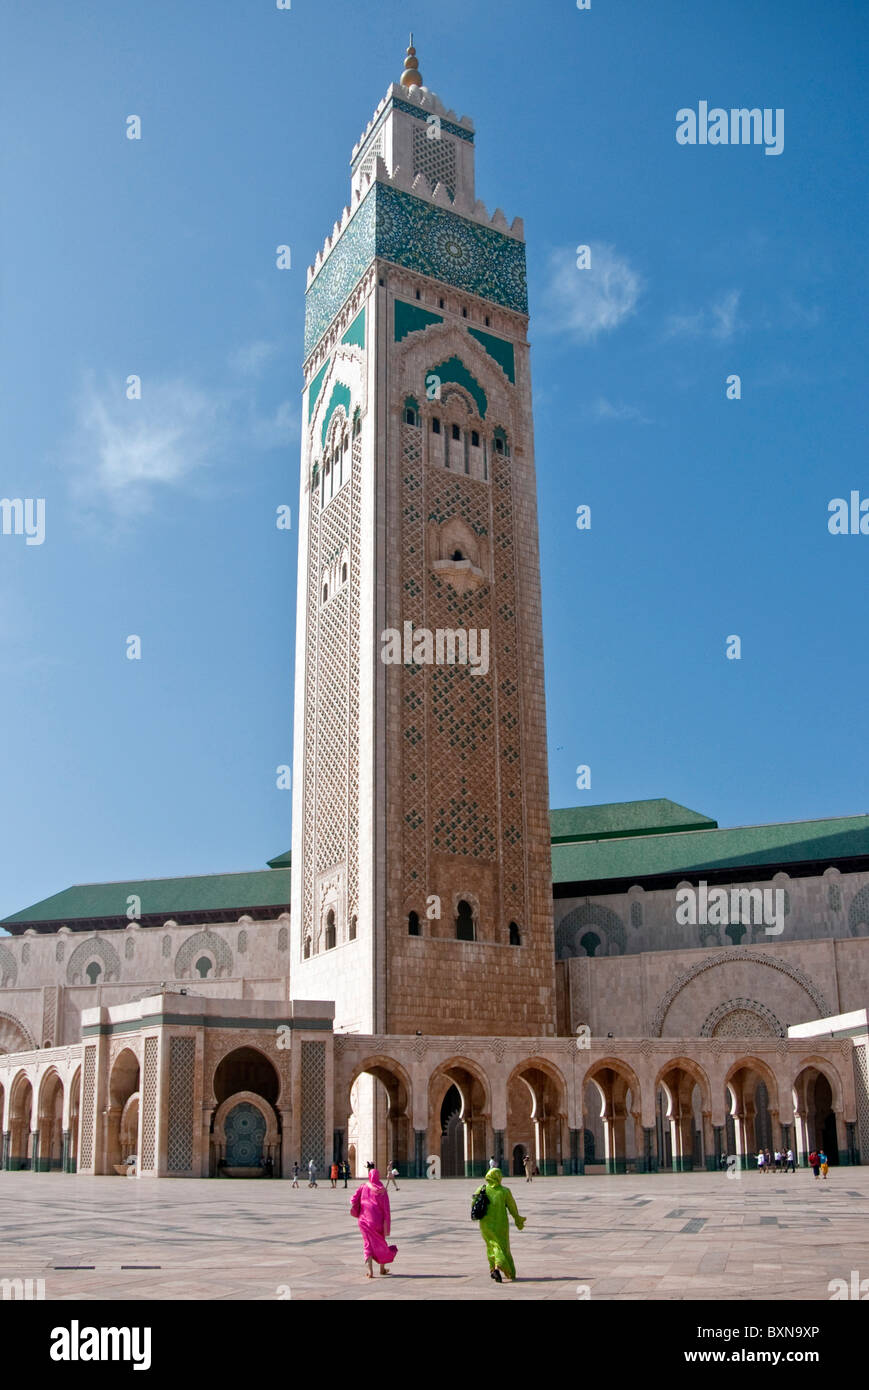 Morocco's Hassan II Mosque in Casablanca is world's 5th largest with world's tallest minaret Stock Photo